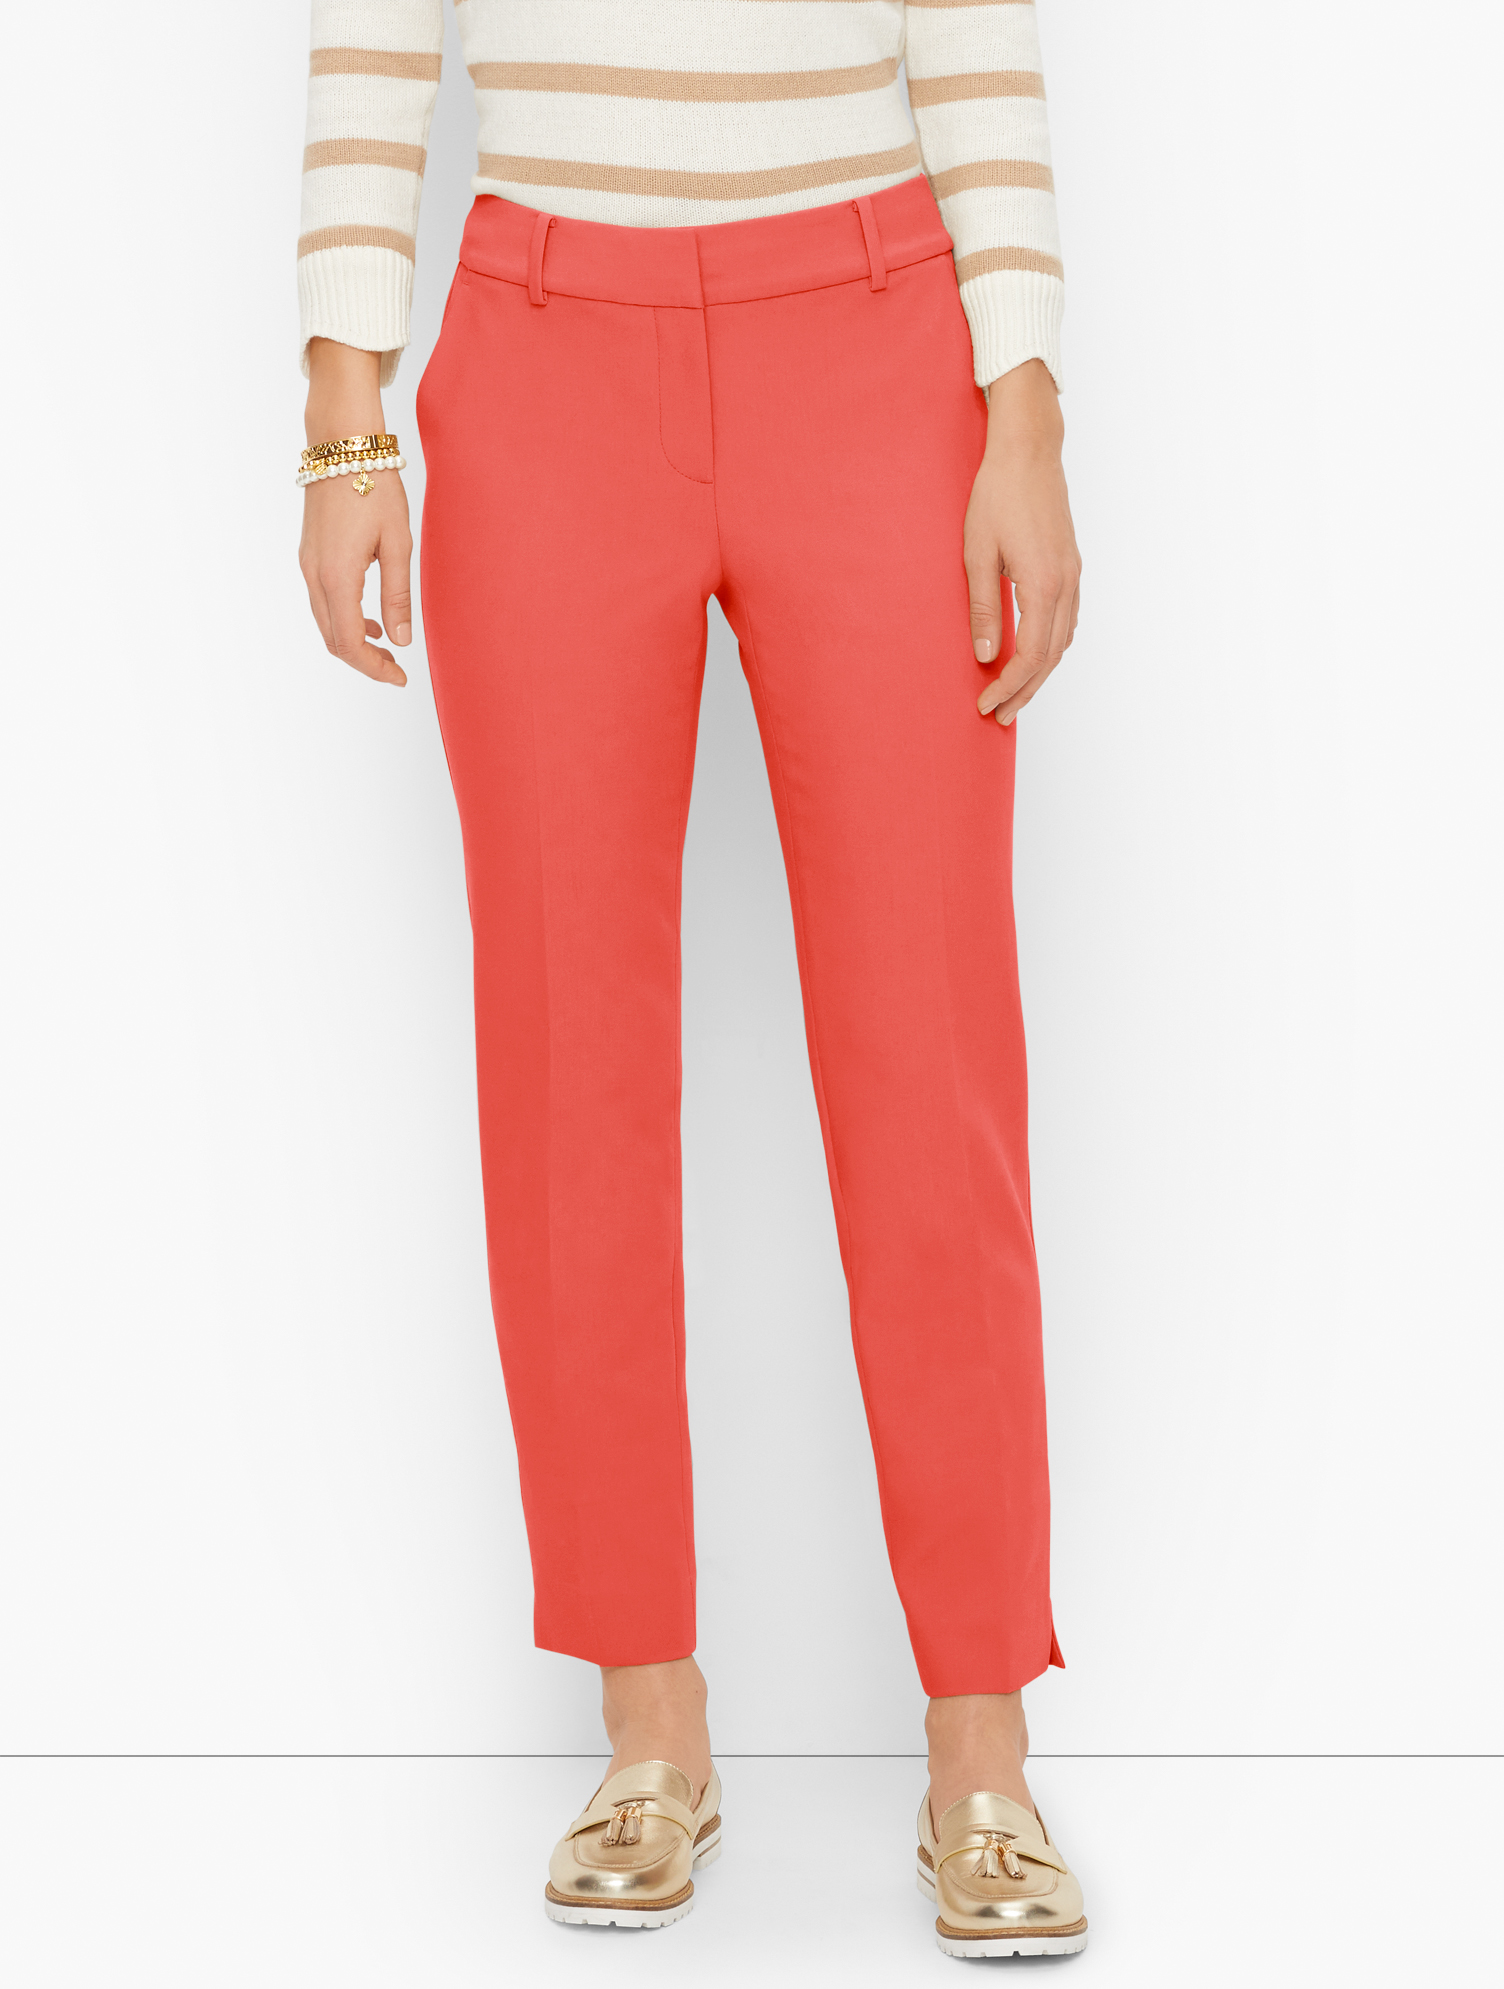 Talbots Petite -  Hampshire Ankle Pants - Coral Punch - 16